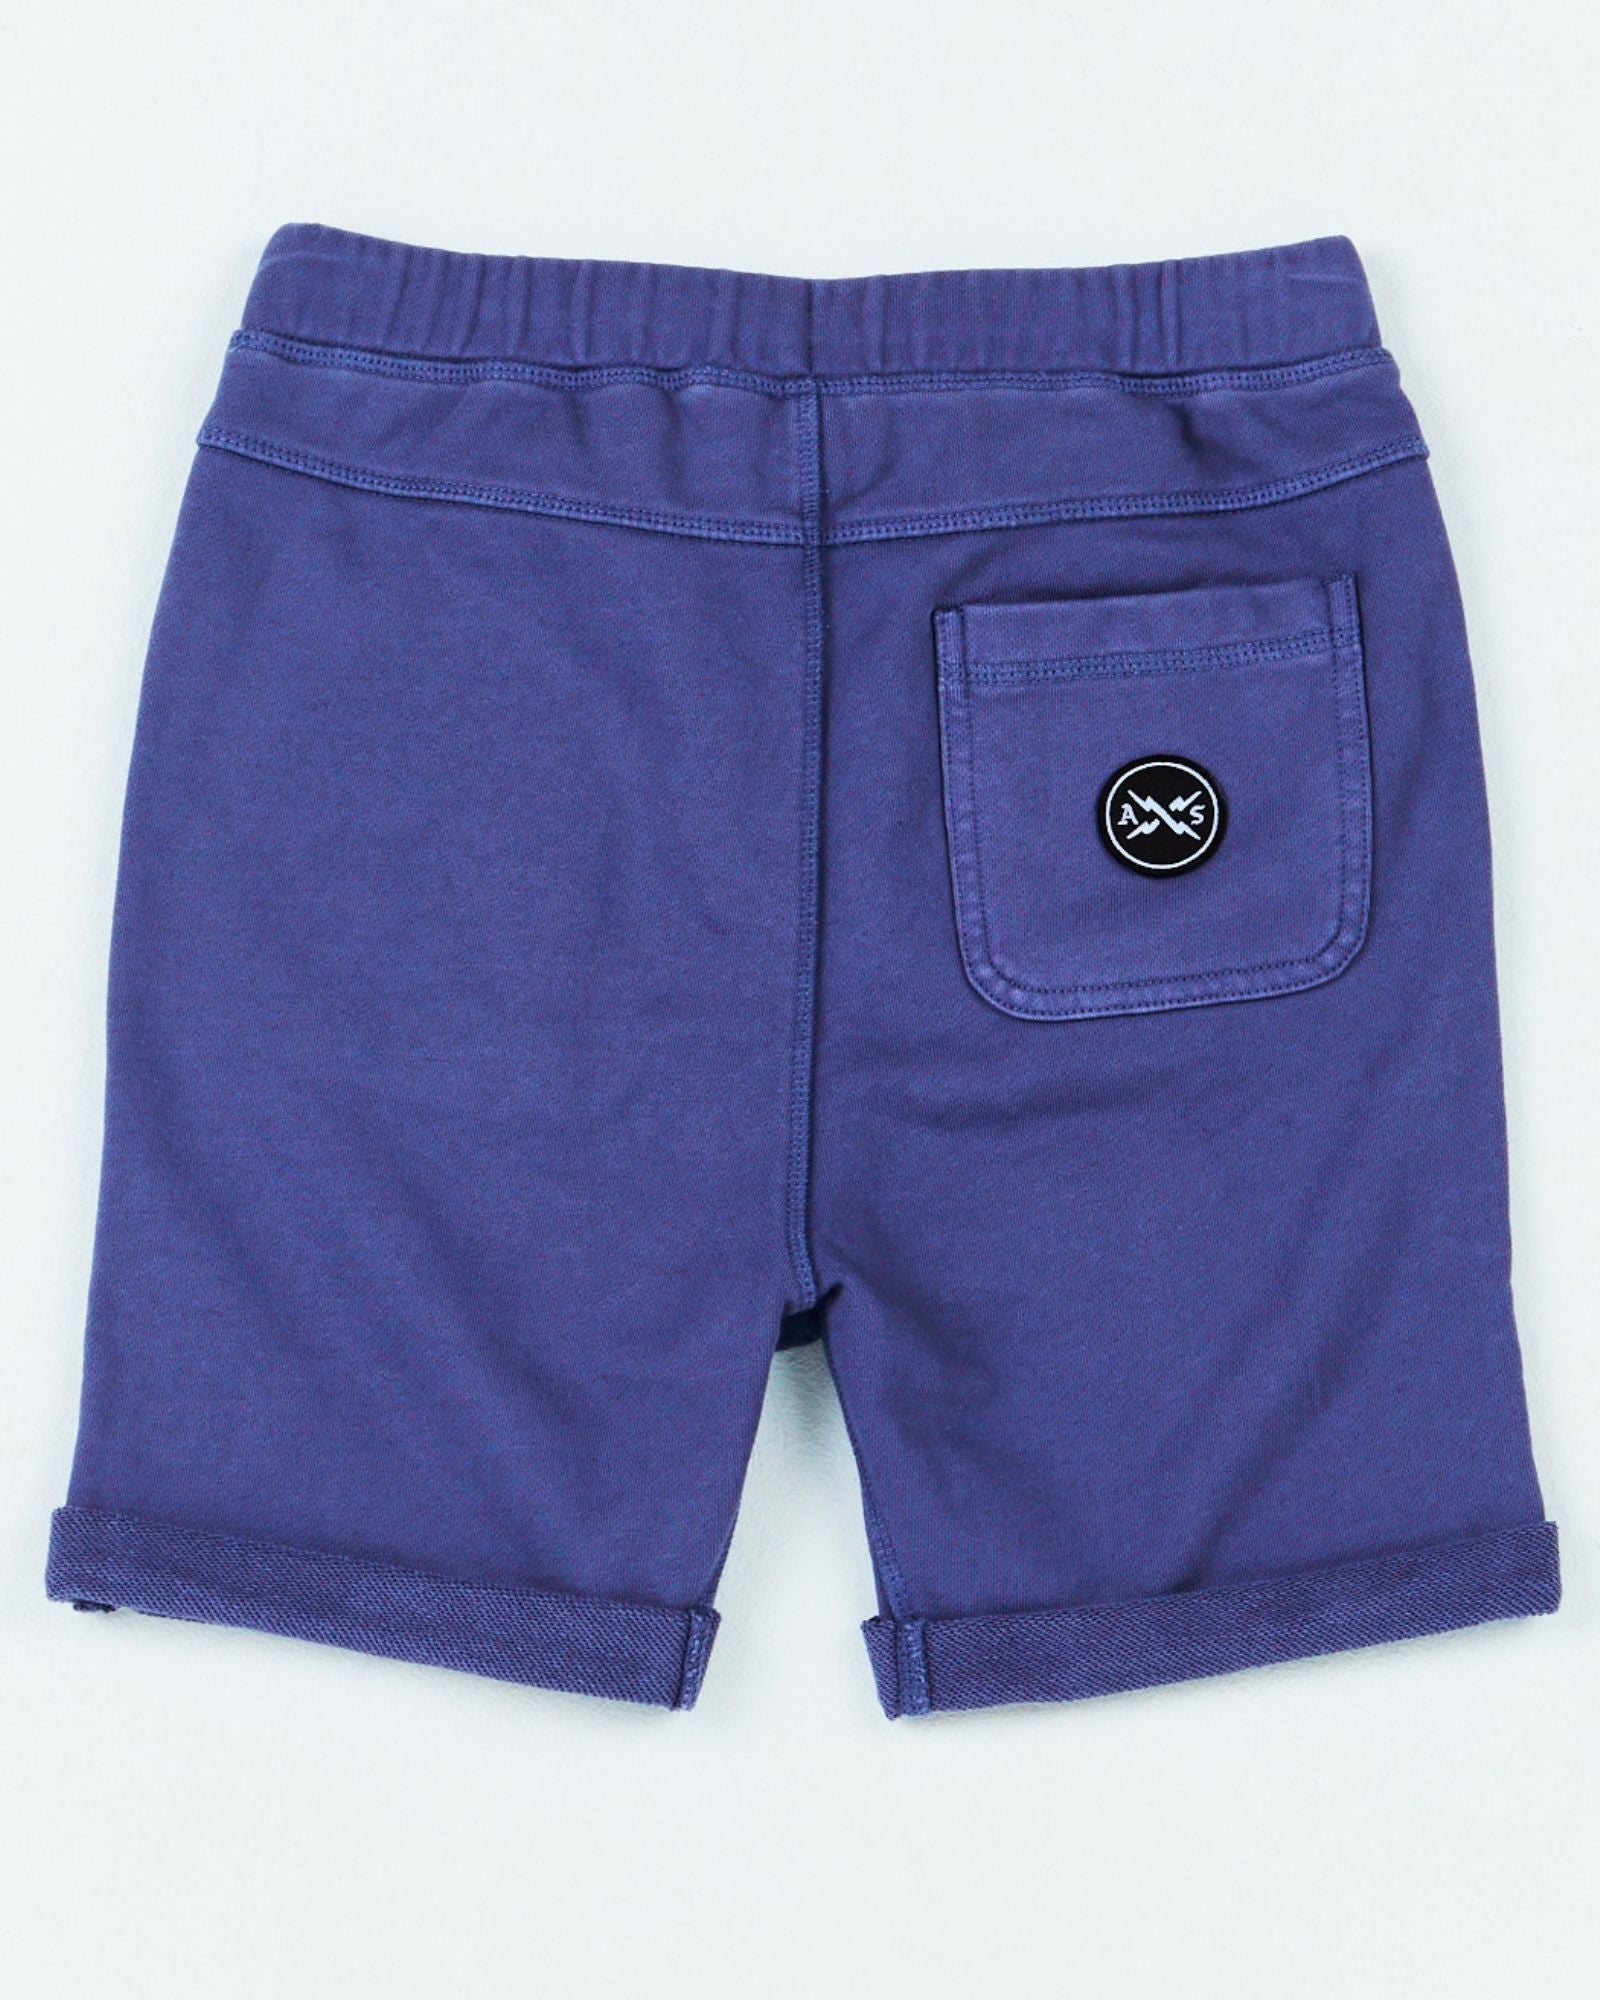 Alphabet Soup's Kids Comfy Shorts for boys aged 2-7. Featuring pigment dye print, heavy weight cotton, adjustable drawcord waist, rolled hem, faux fly, twin hand pockets, embroidered front pocket, back pocket logo patch.